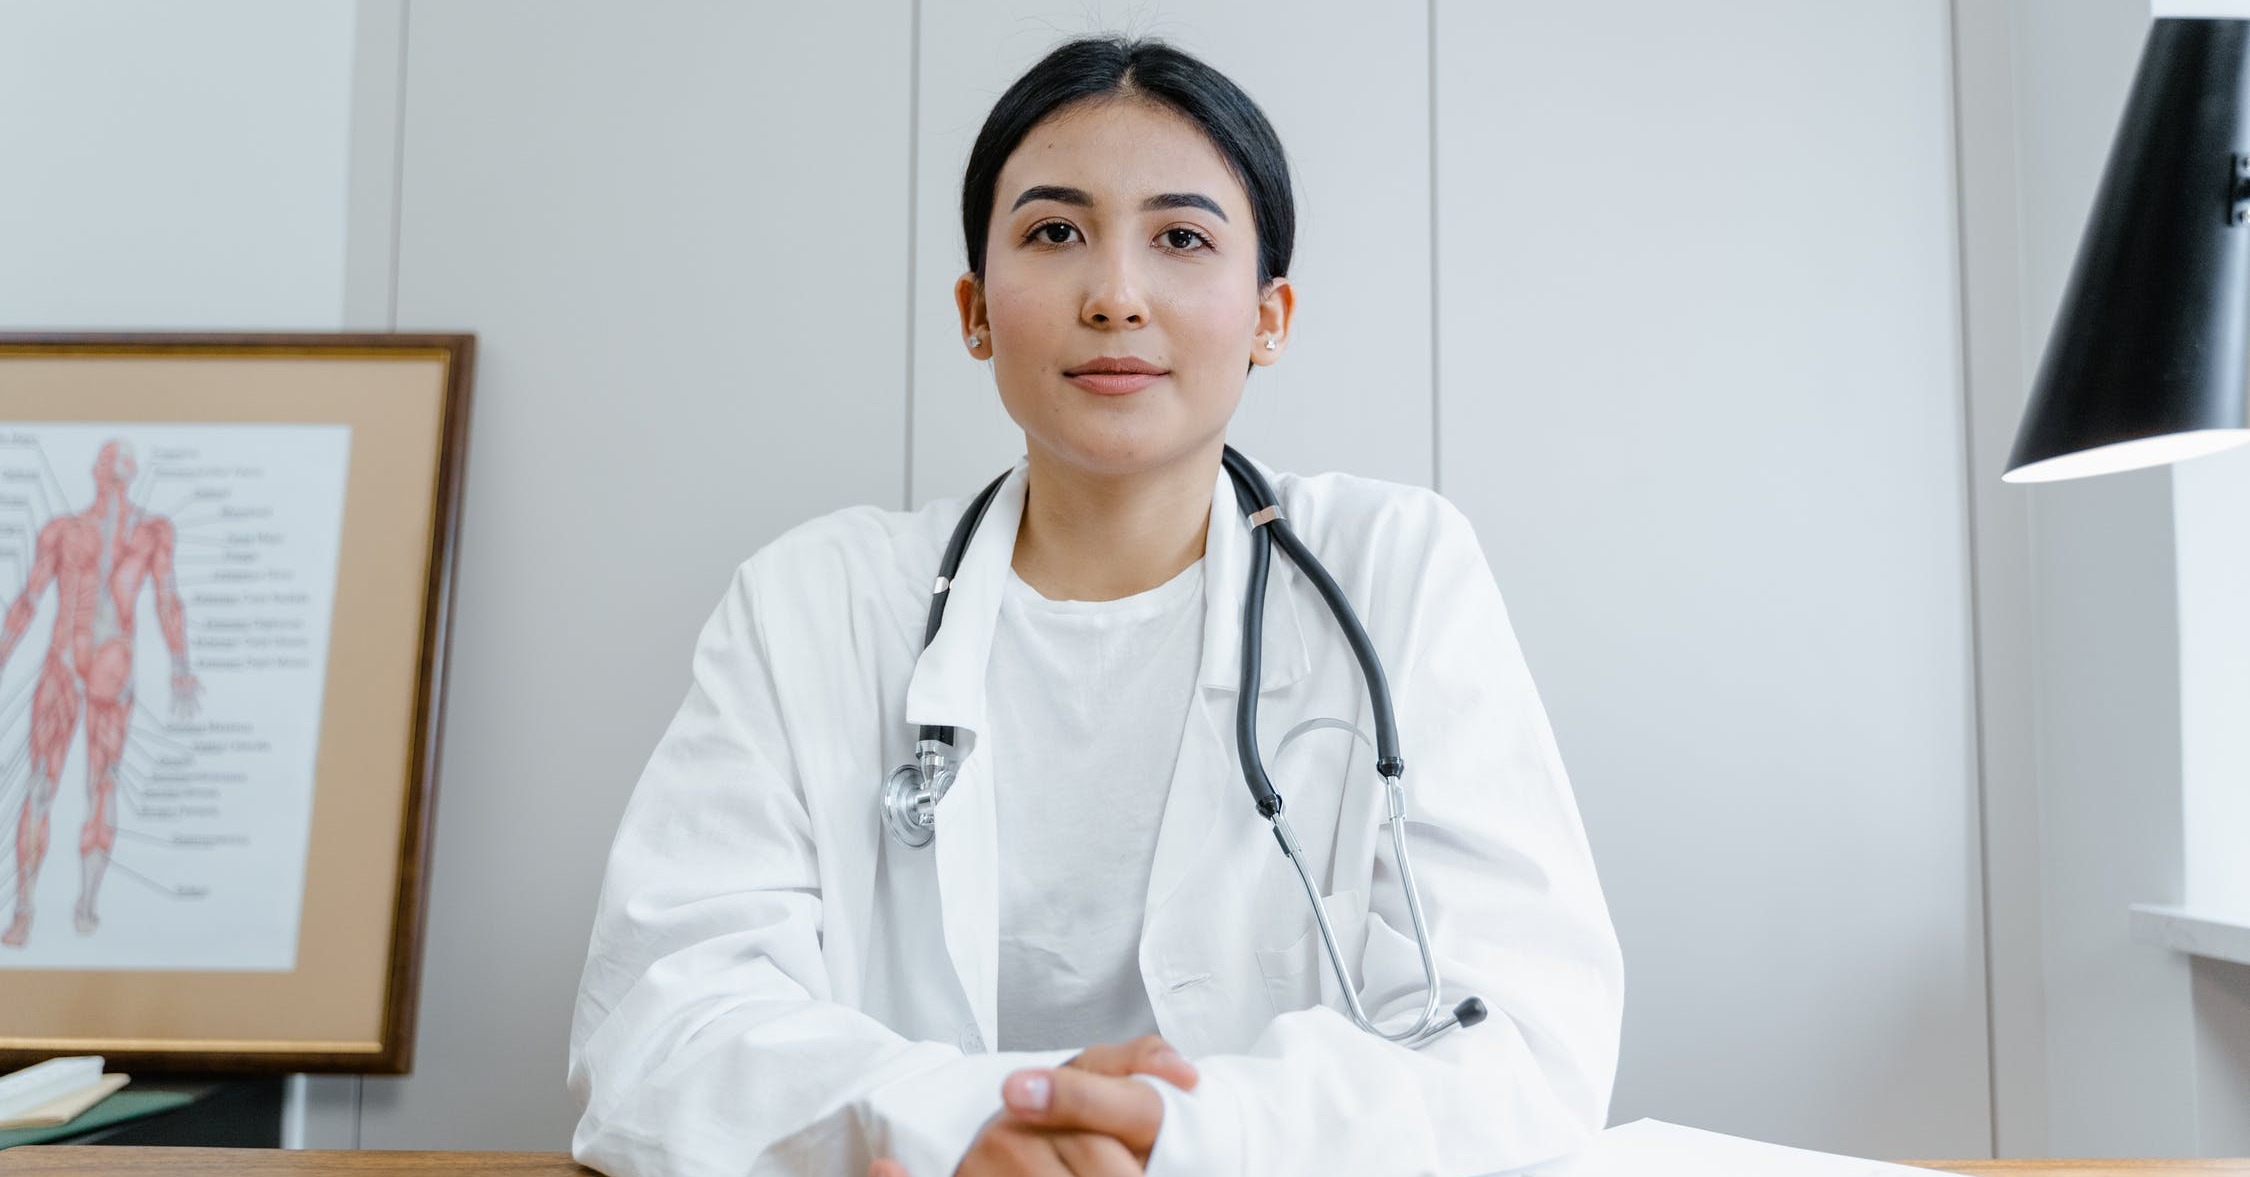 <p>Physician assistant specialties include behavioral health, emergency medicine, family medicine, internal medicine, OB/GYN, pediatrics, and surgery (and surgical subspecialties).</p>